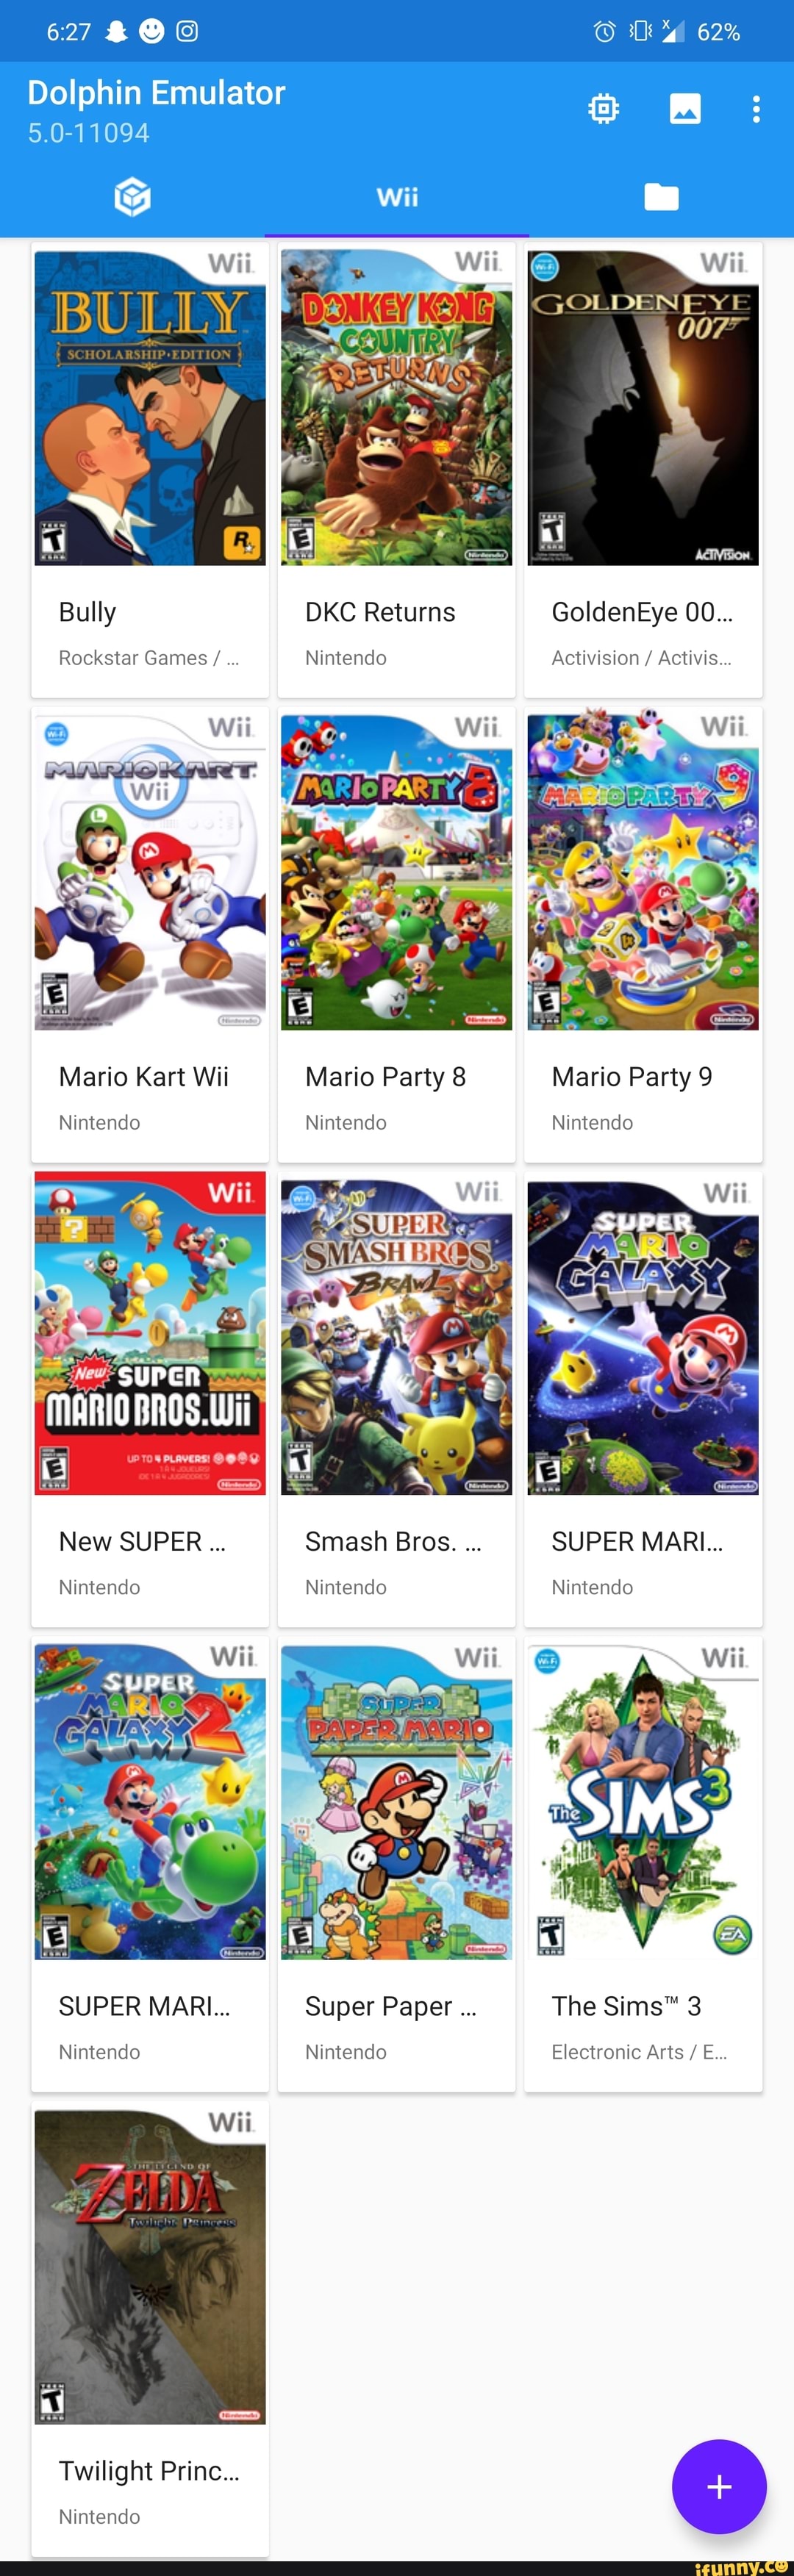 how to play missions in mario kart wii on dolphin emulator